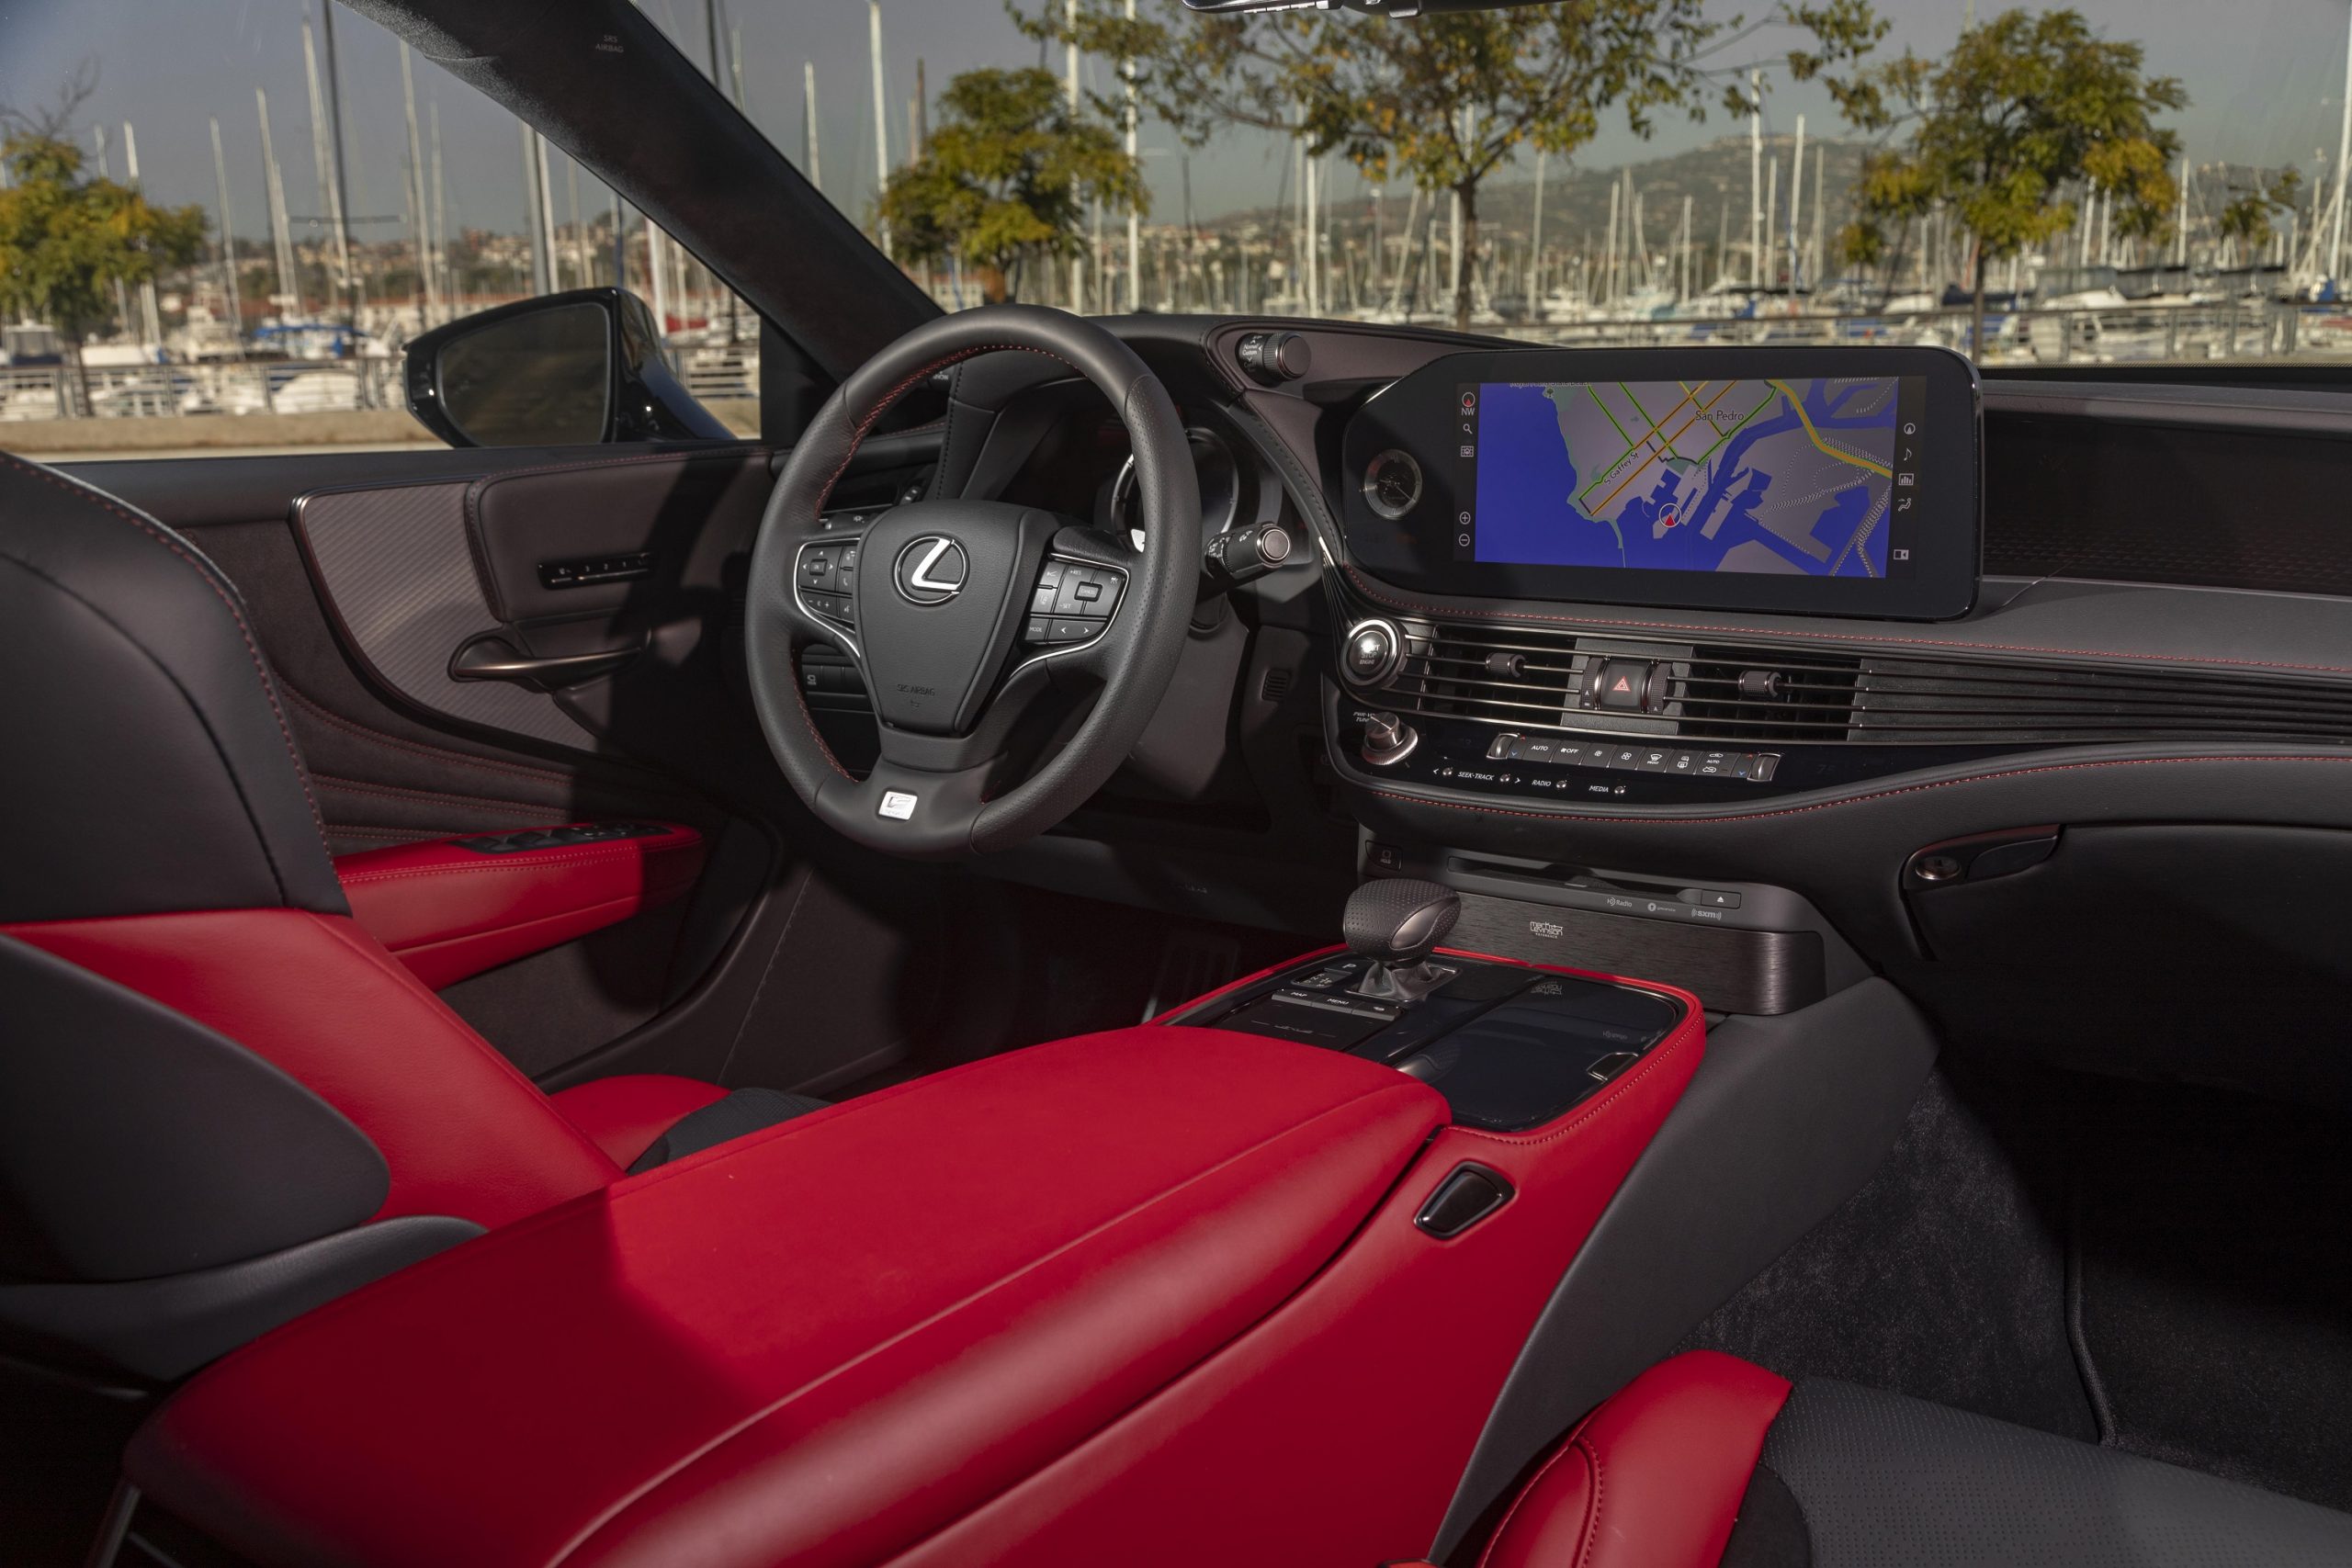 The red interior of the new LS 500 sedan